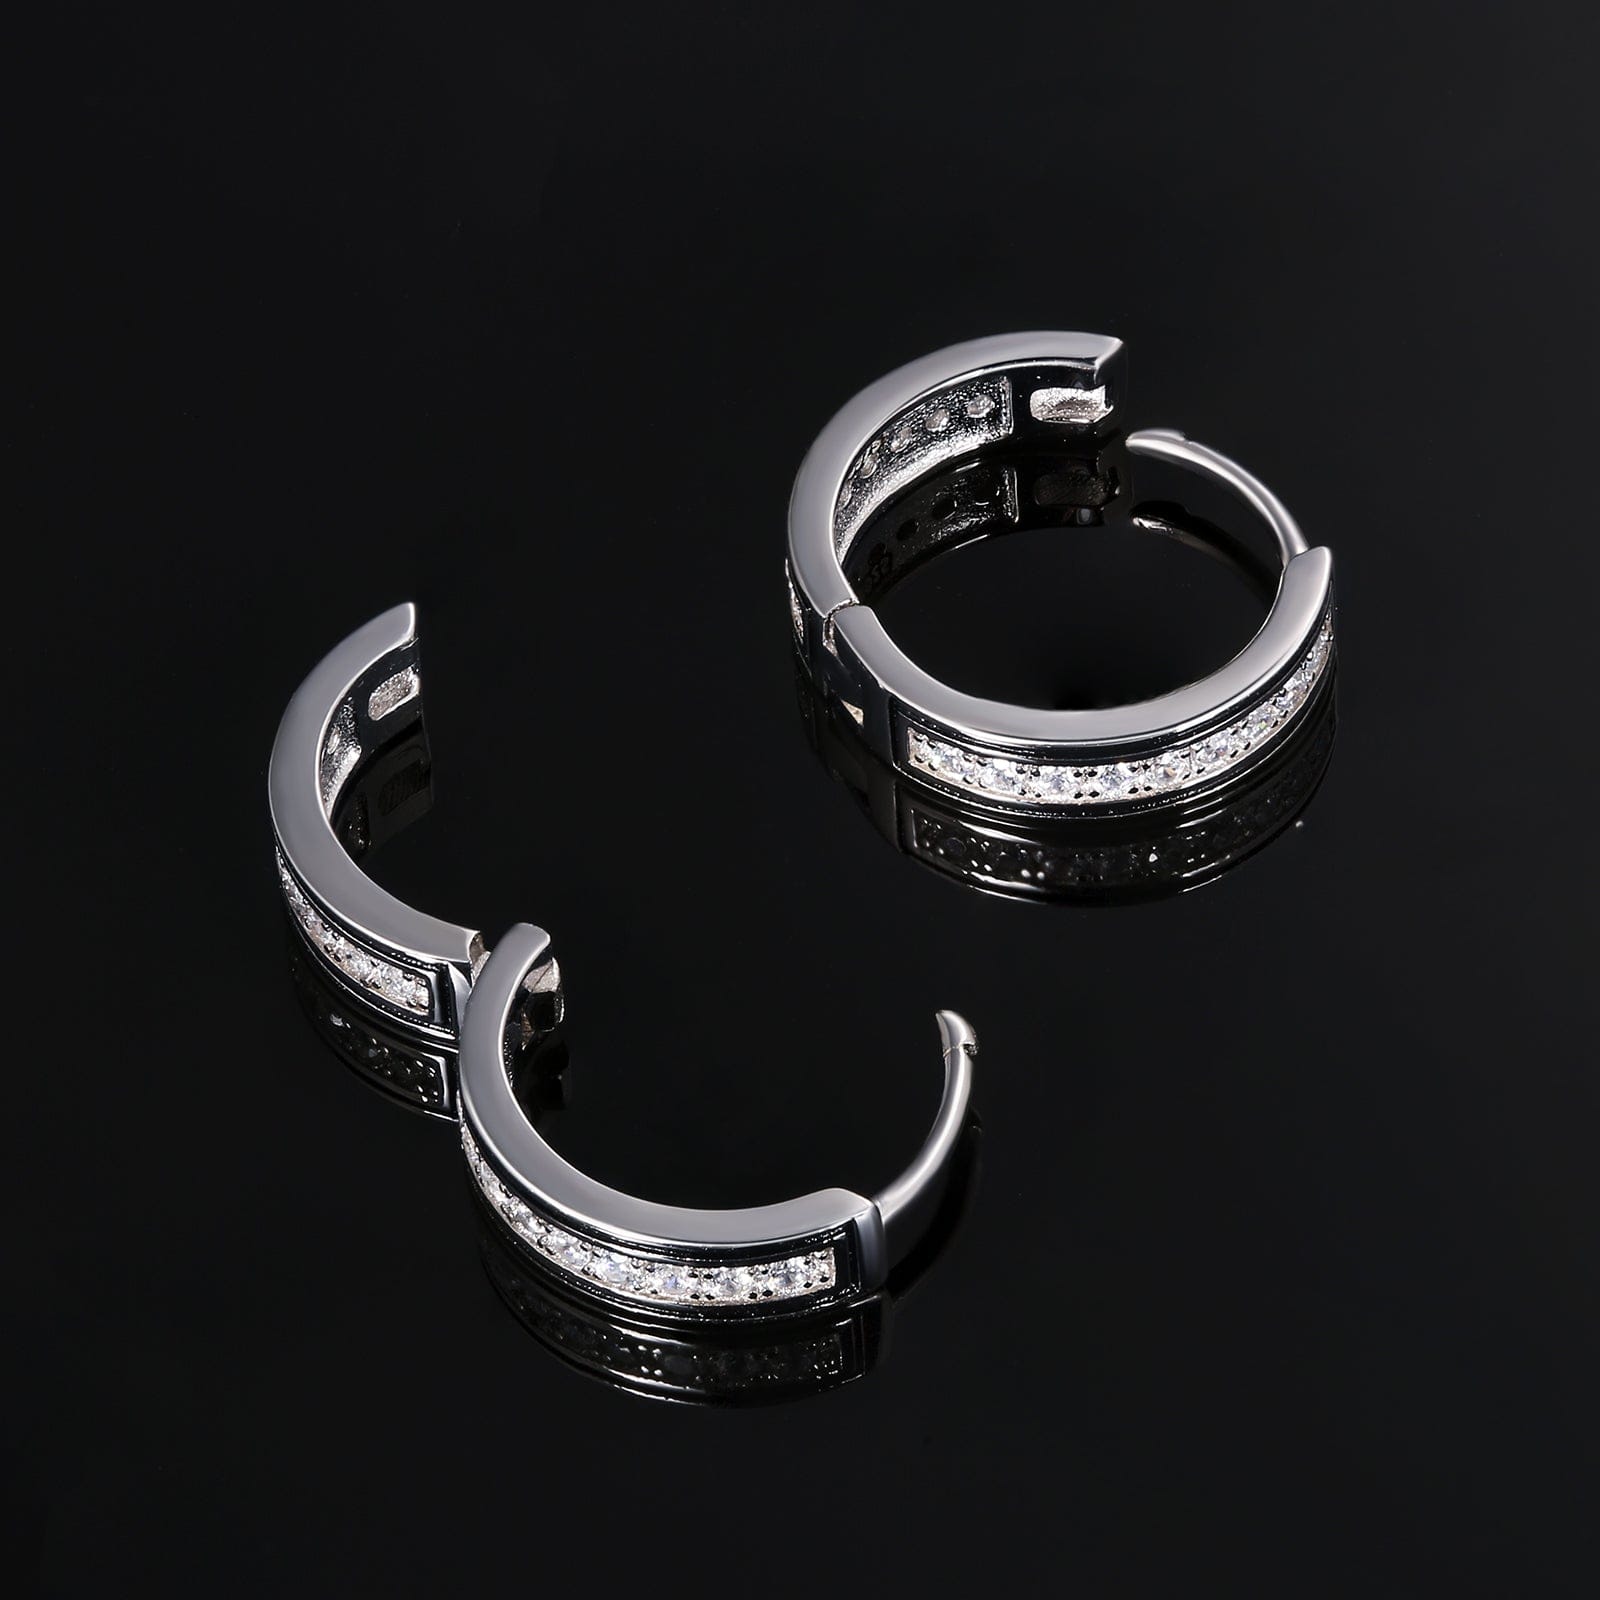 Whlosale Mens Earrings 15mm Iced Out Sterling Silver Diamond Round Hoop